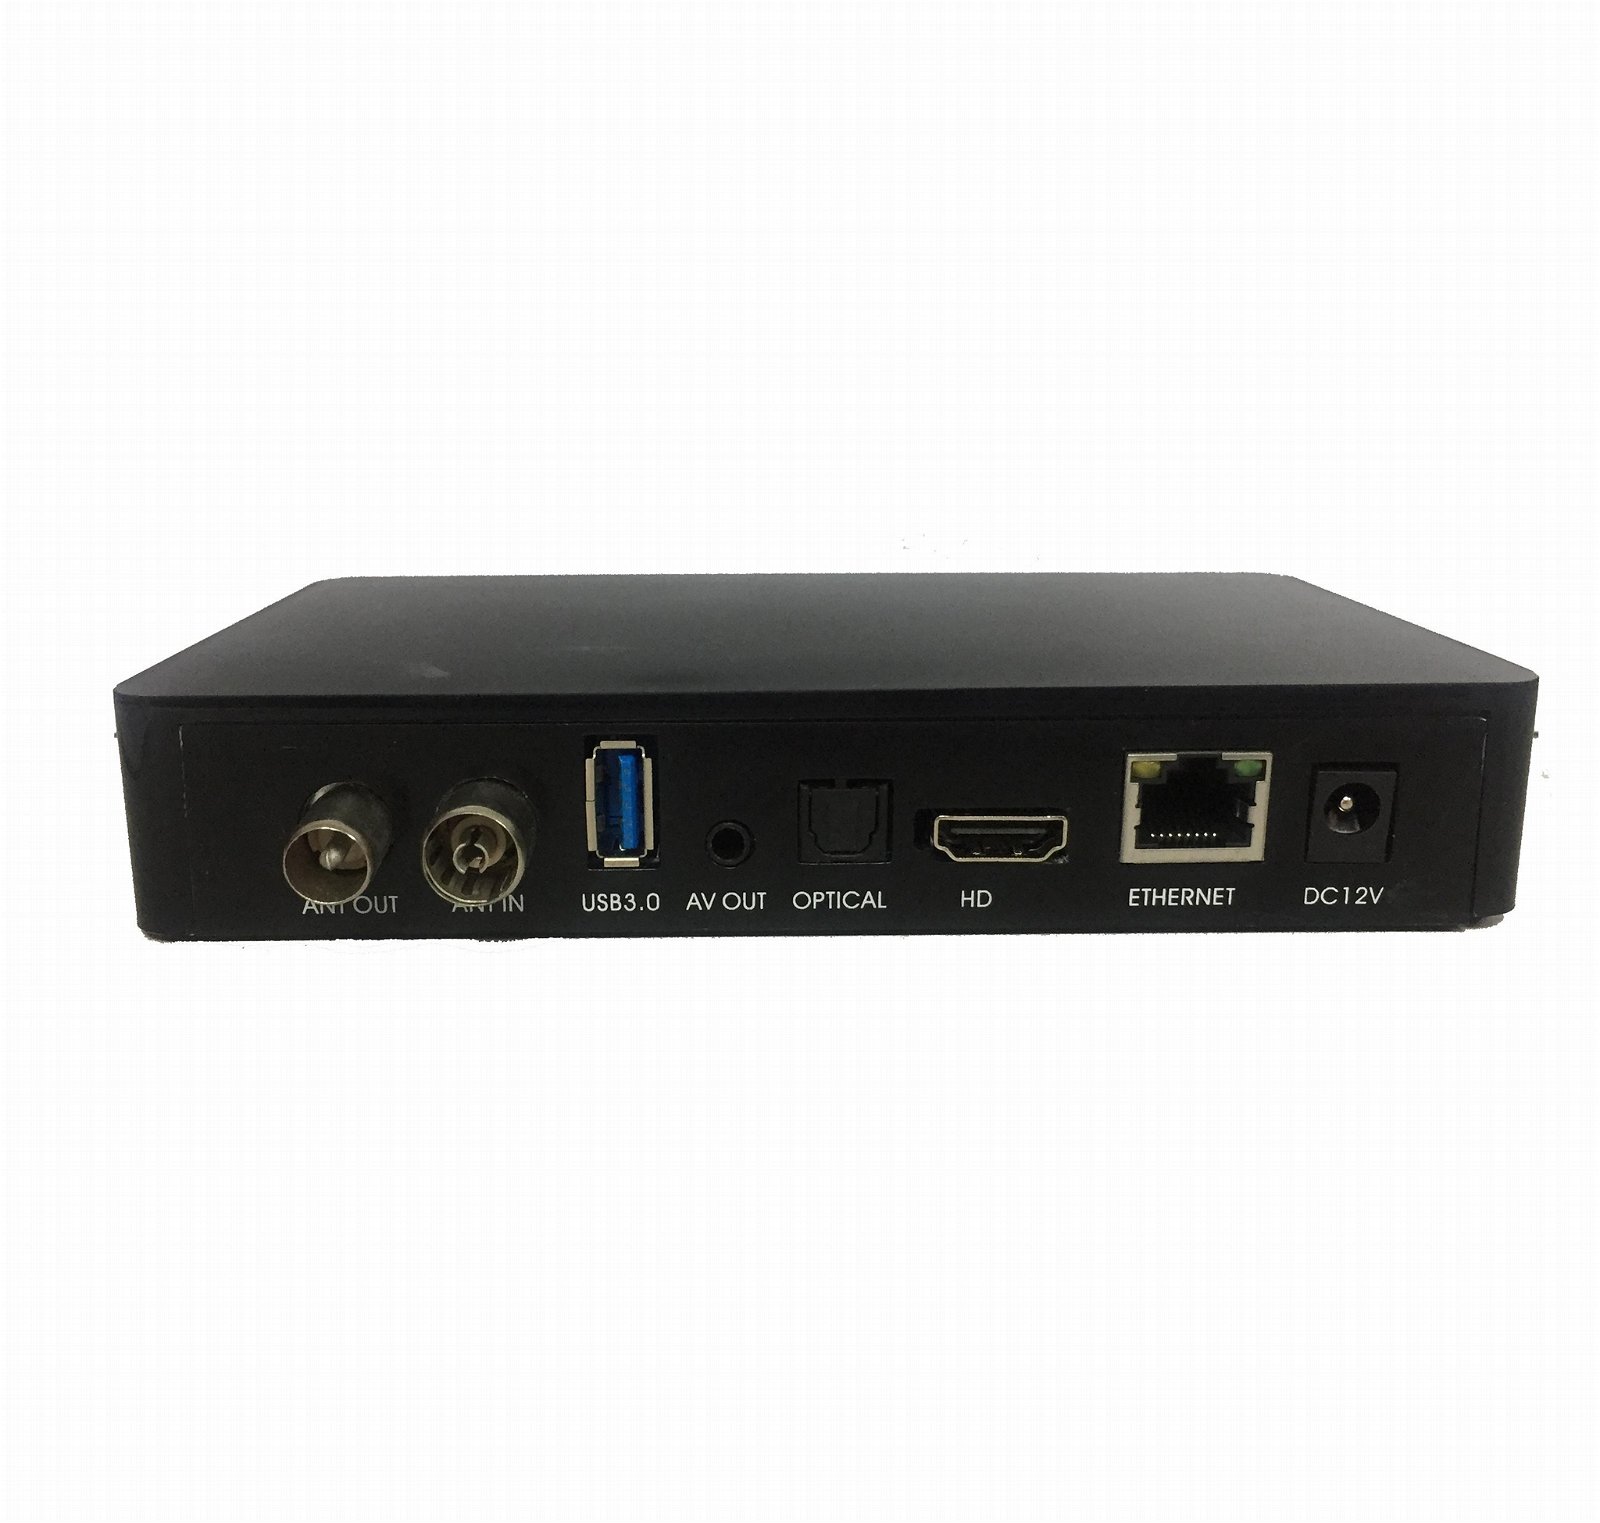 Android system DVB-T2 set top box H.265 HEVC